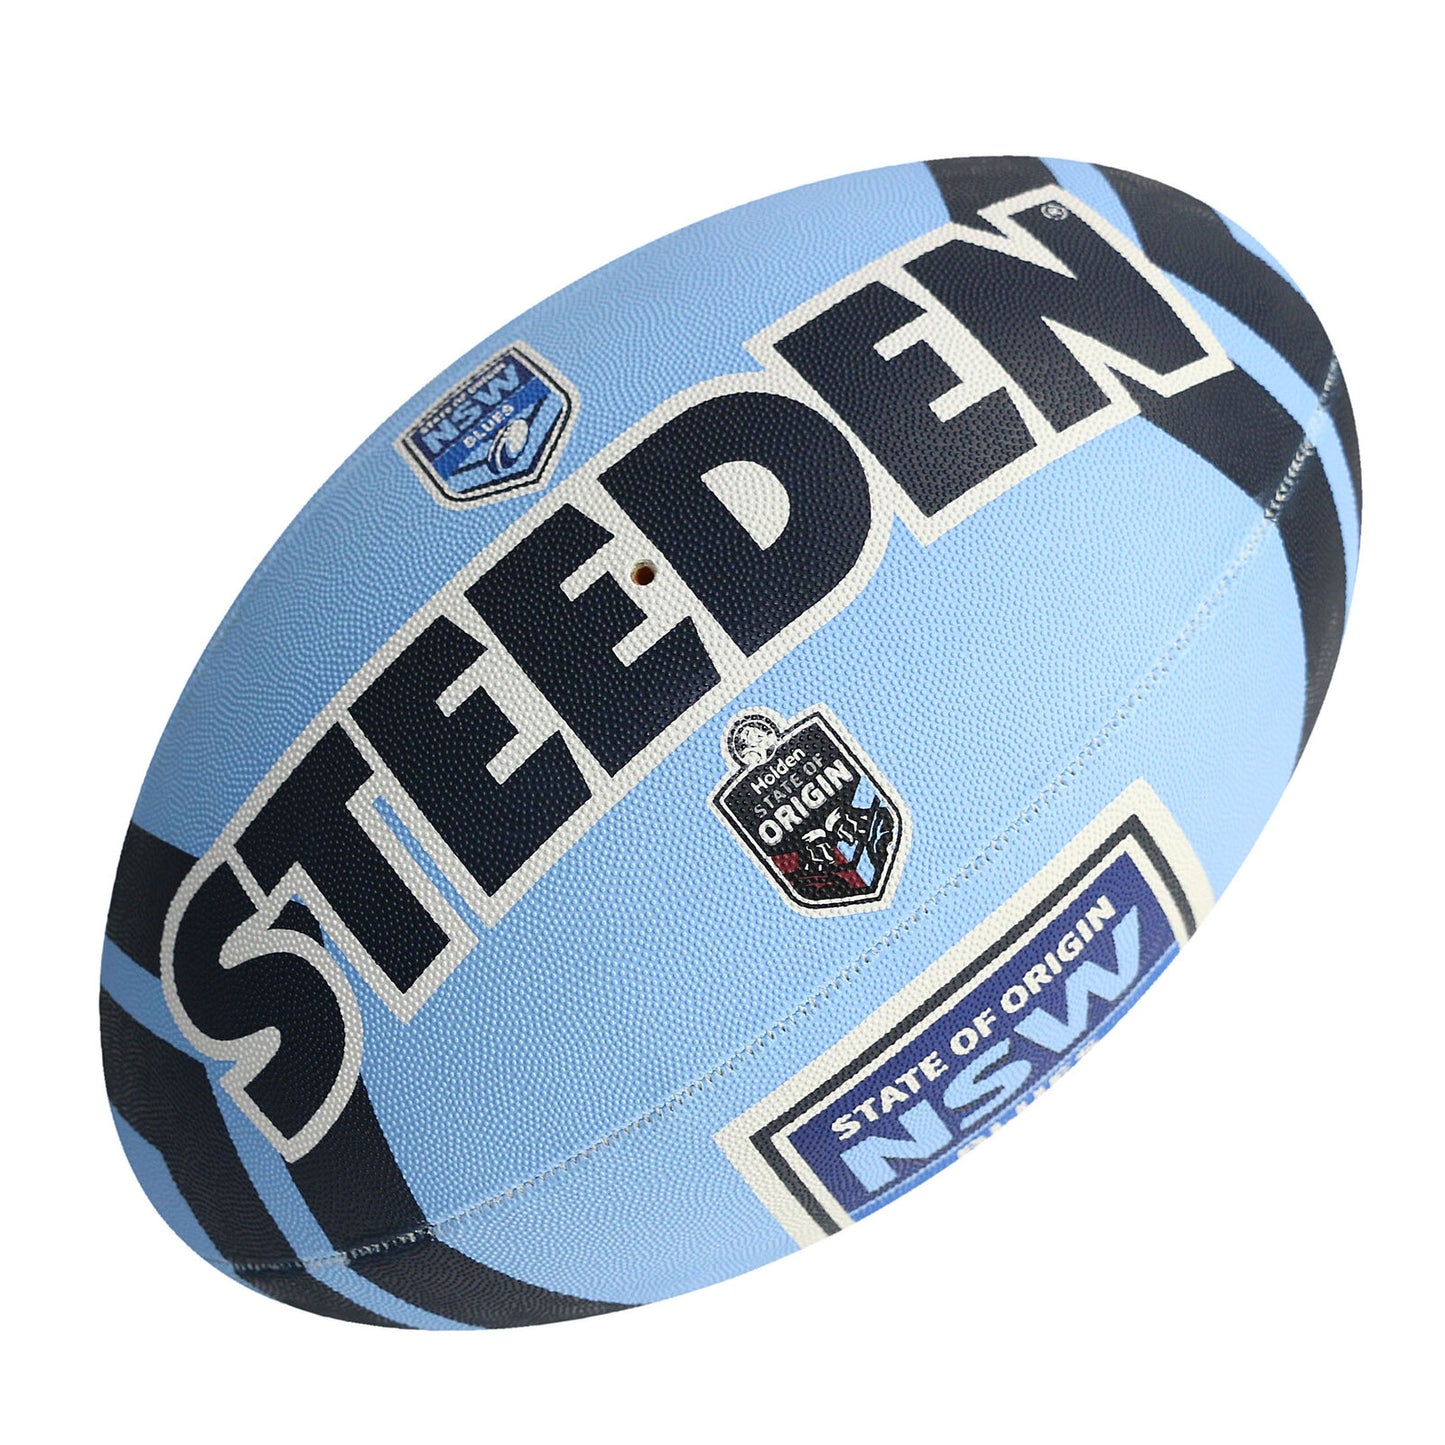 NSW Supporter Football Mini (11 inch)